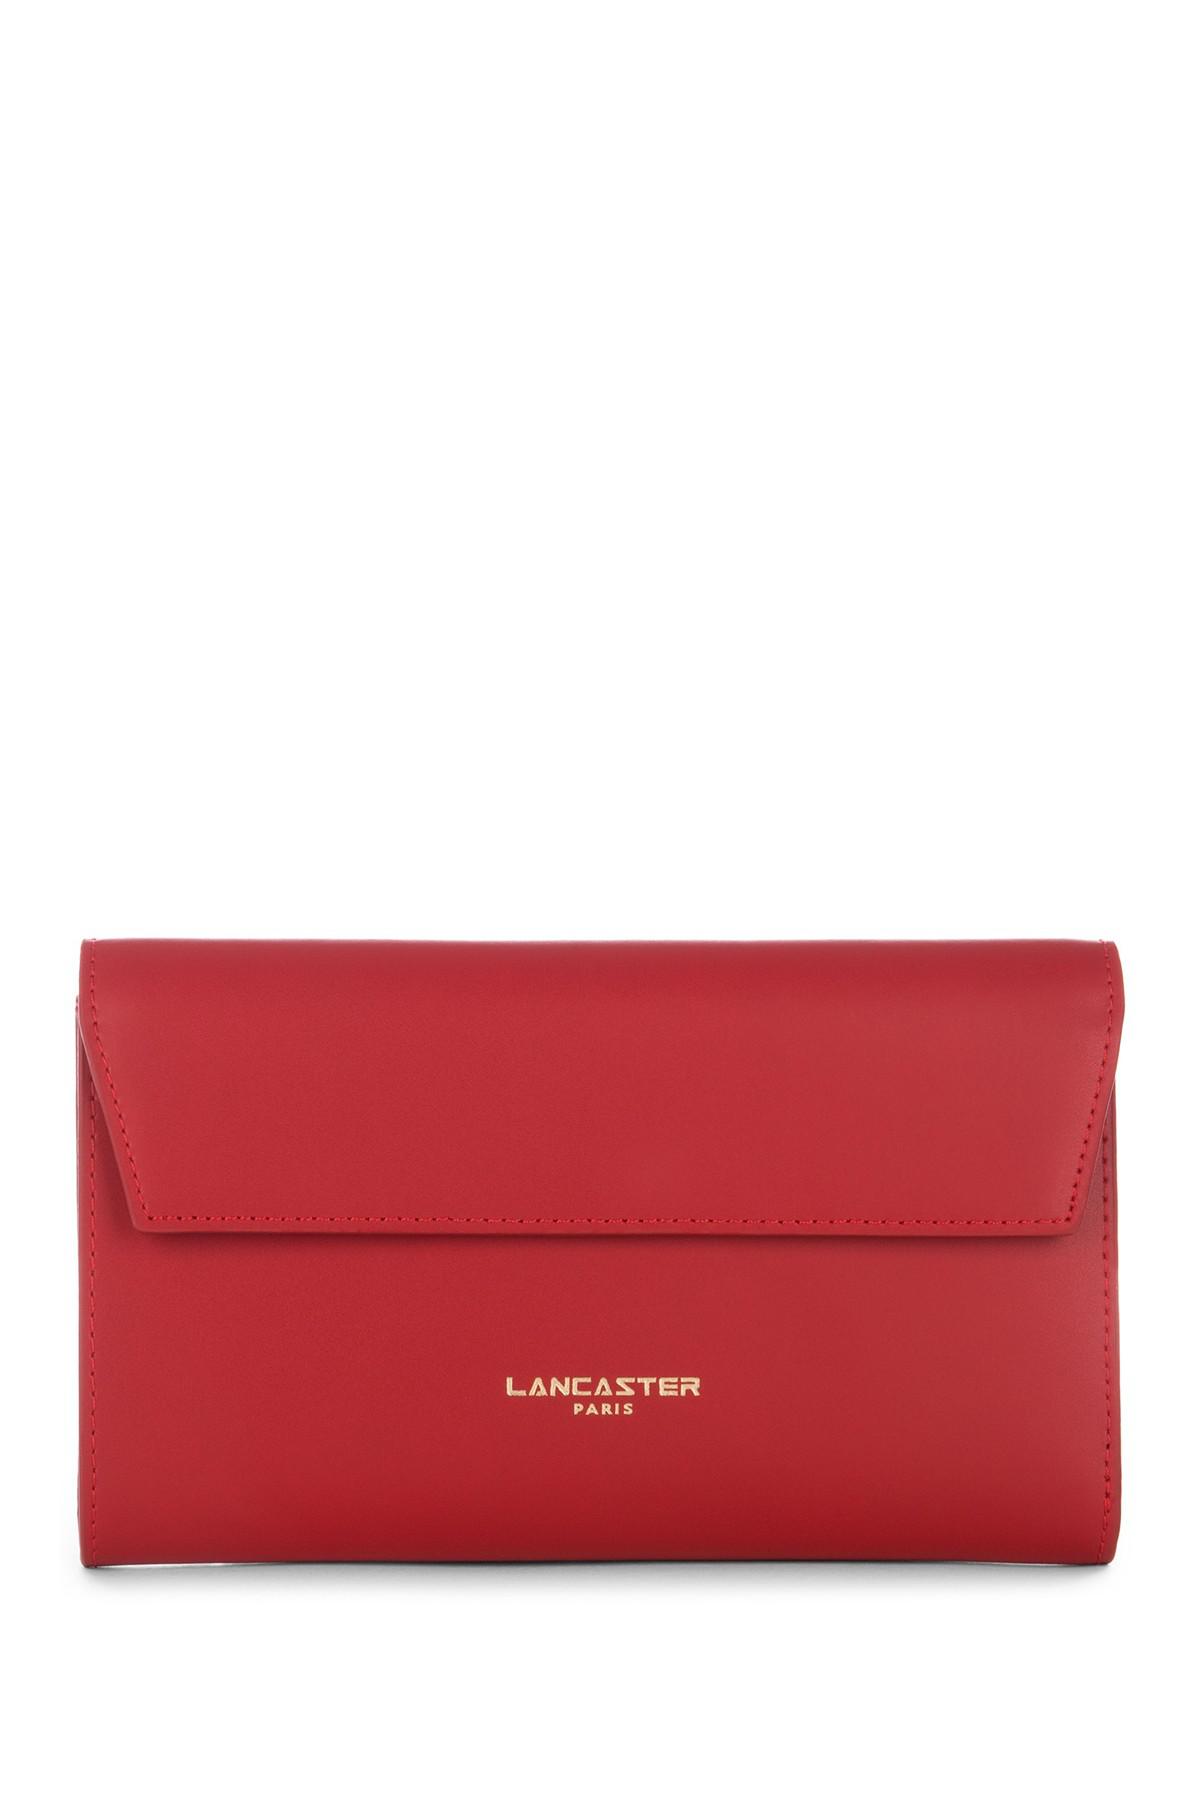 Lancaster Paris Pearl Matte Leather Classic Wallet in Red - Lyst